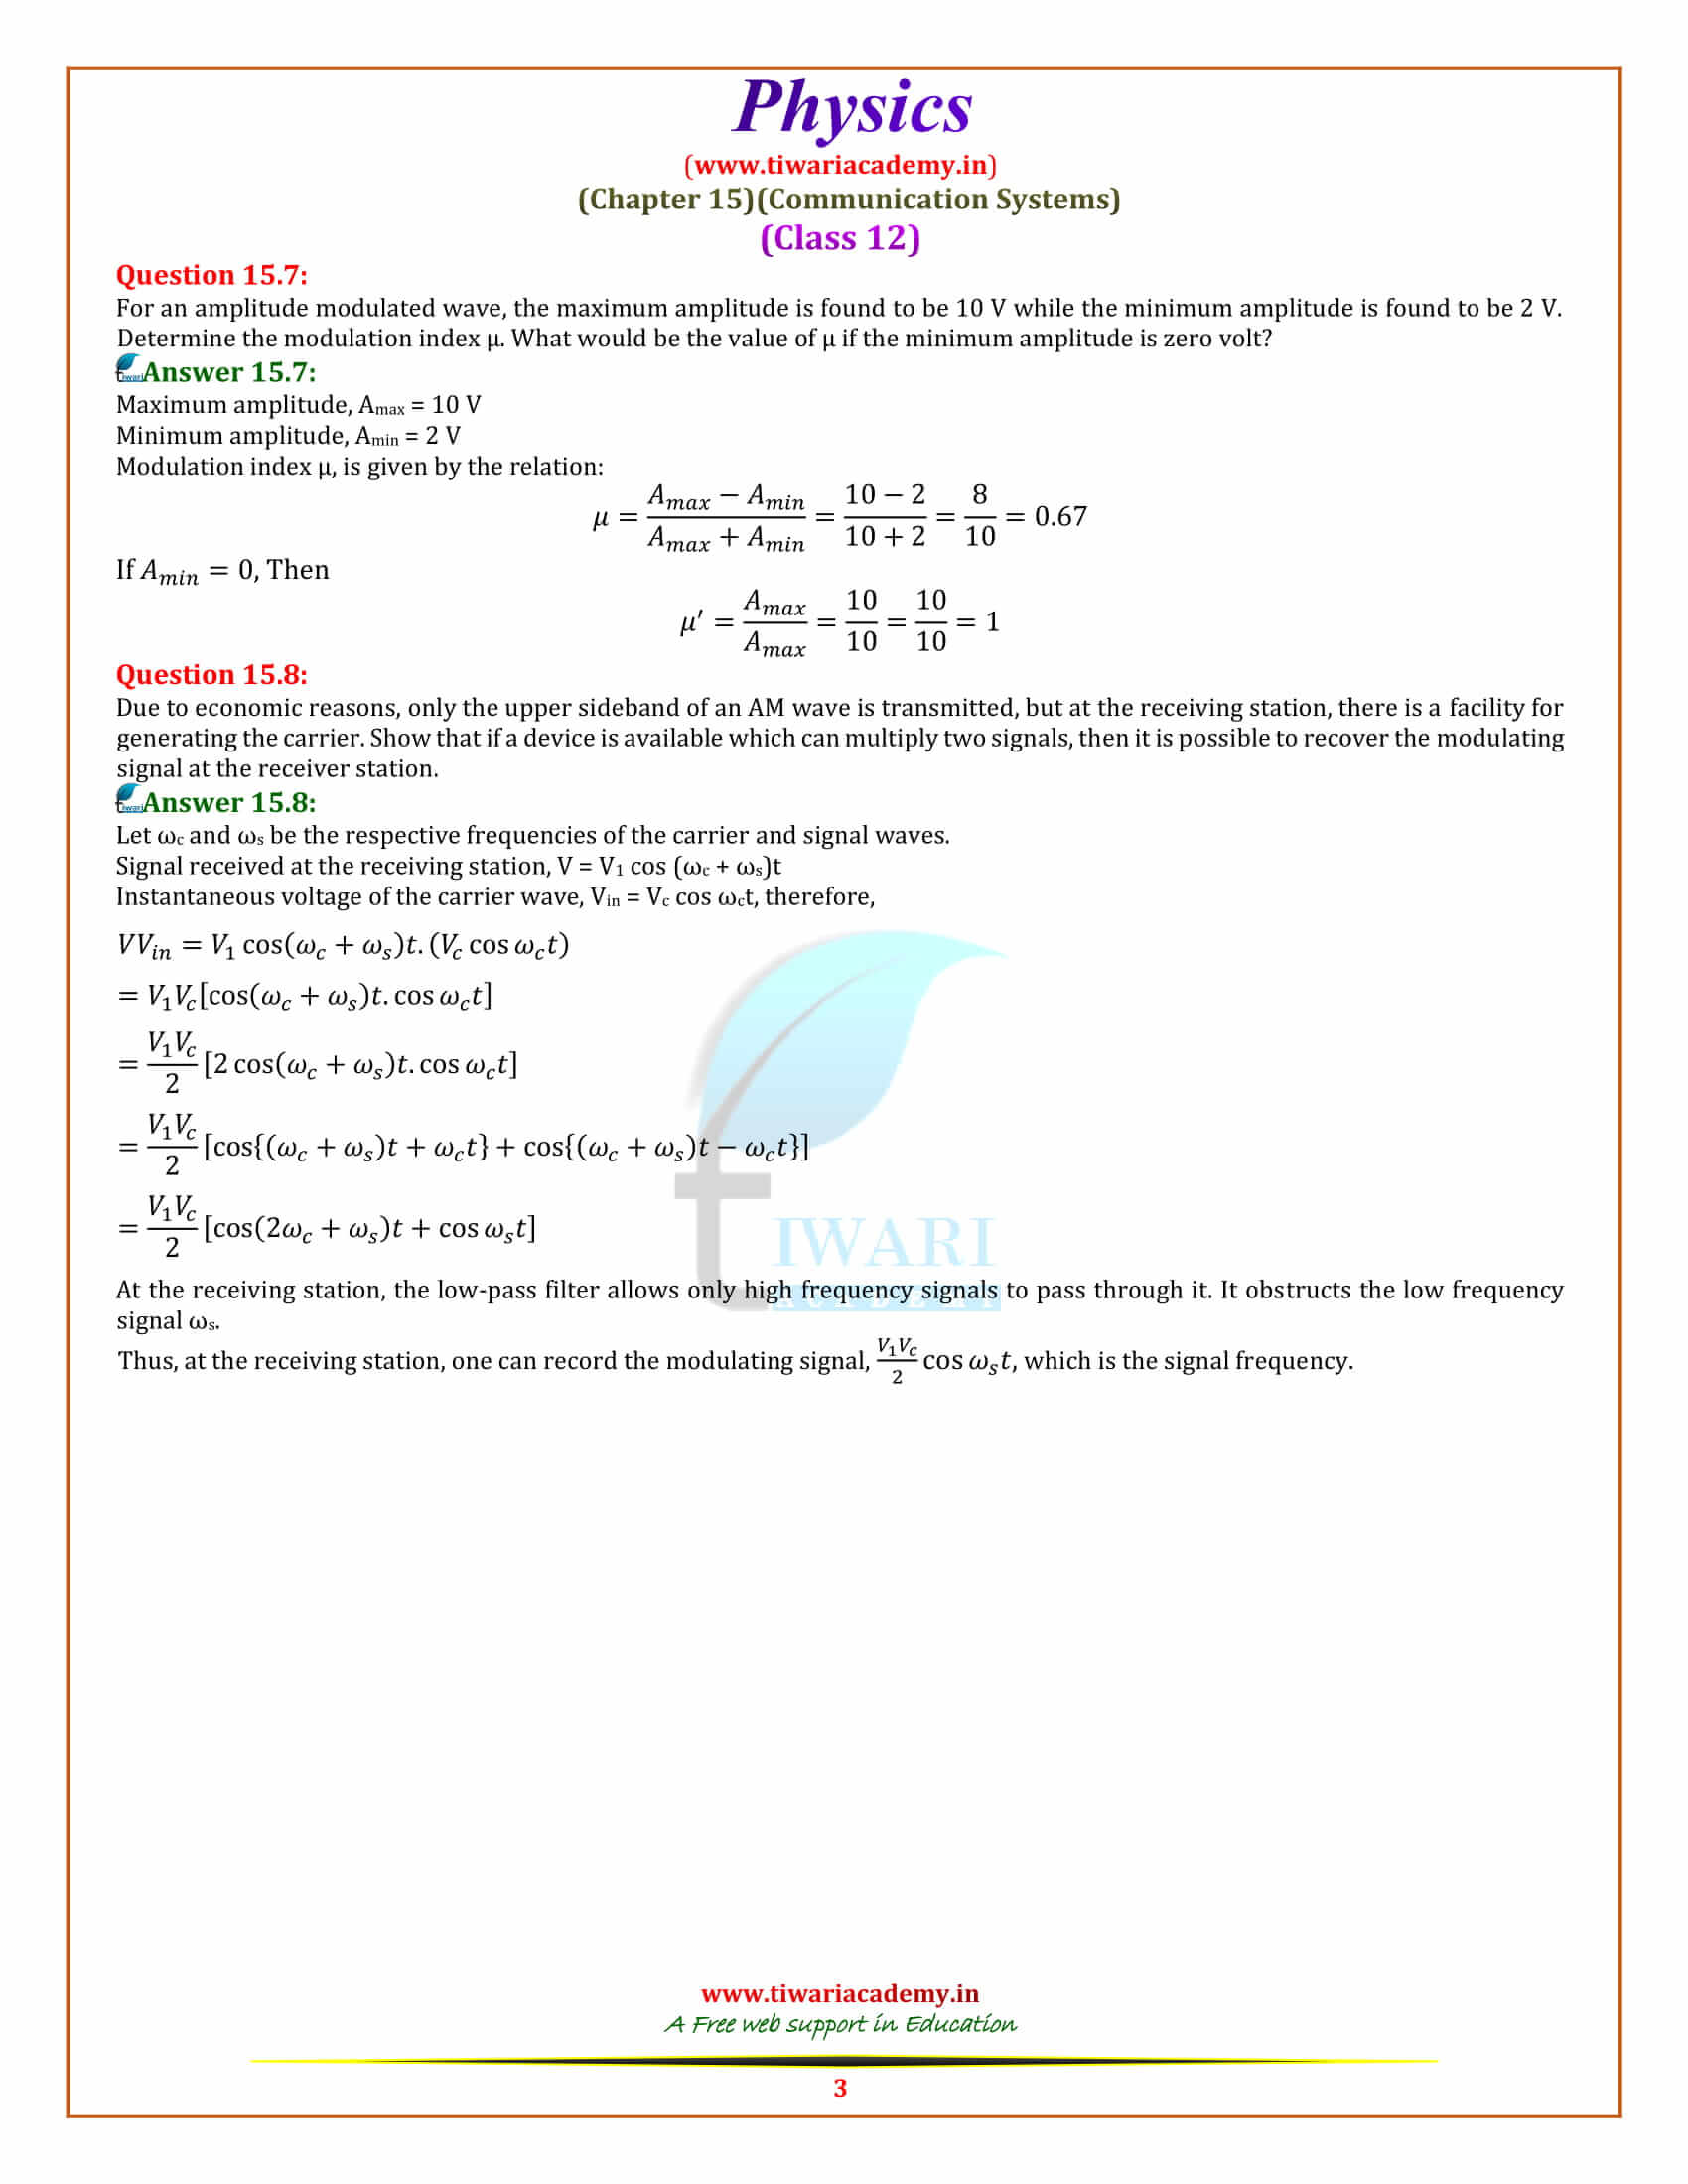 NCERT Solutions for Class 12 Physics Chapter 15 Communication Systems in english medium